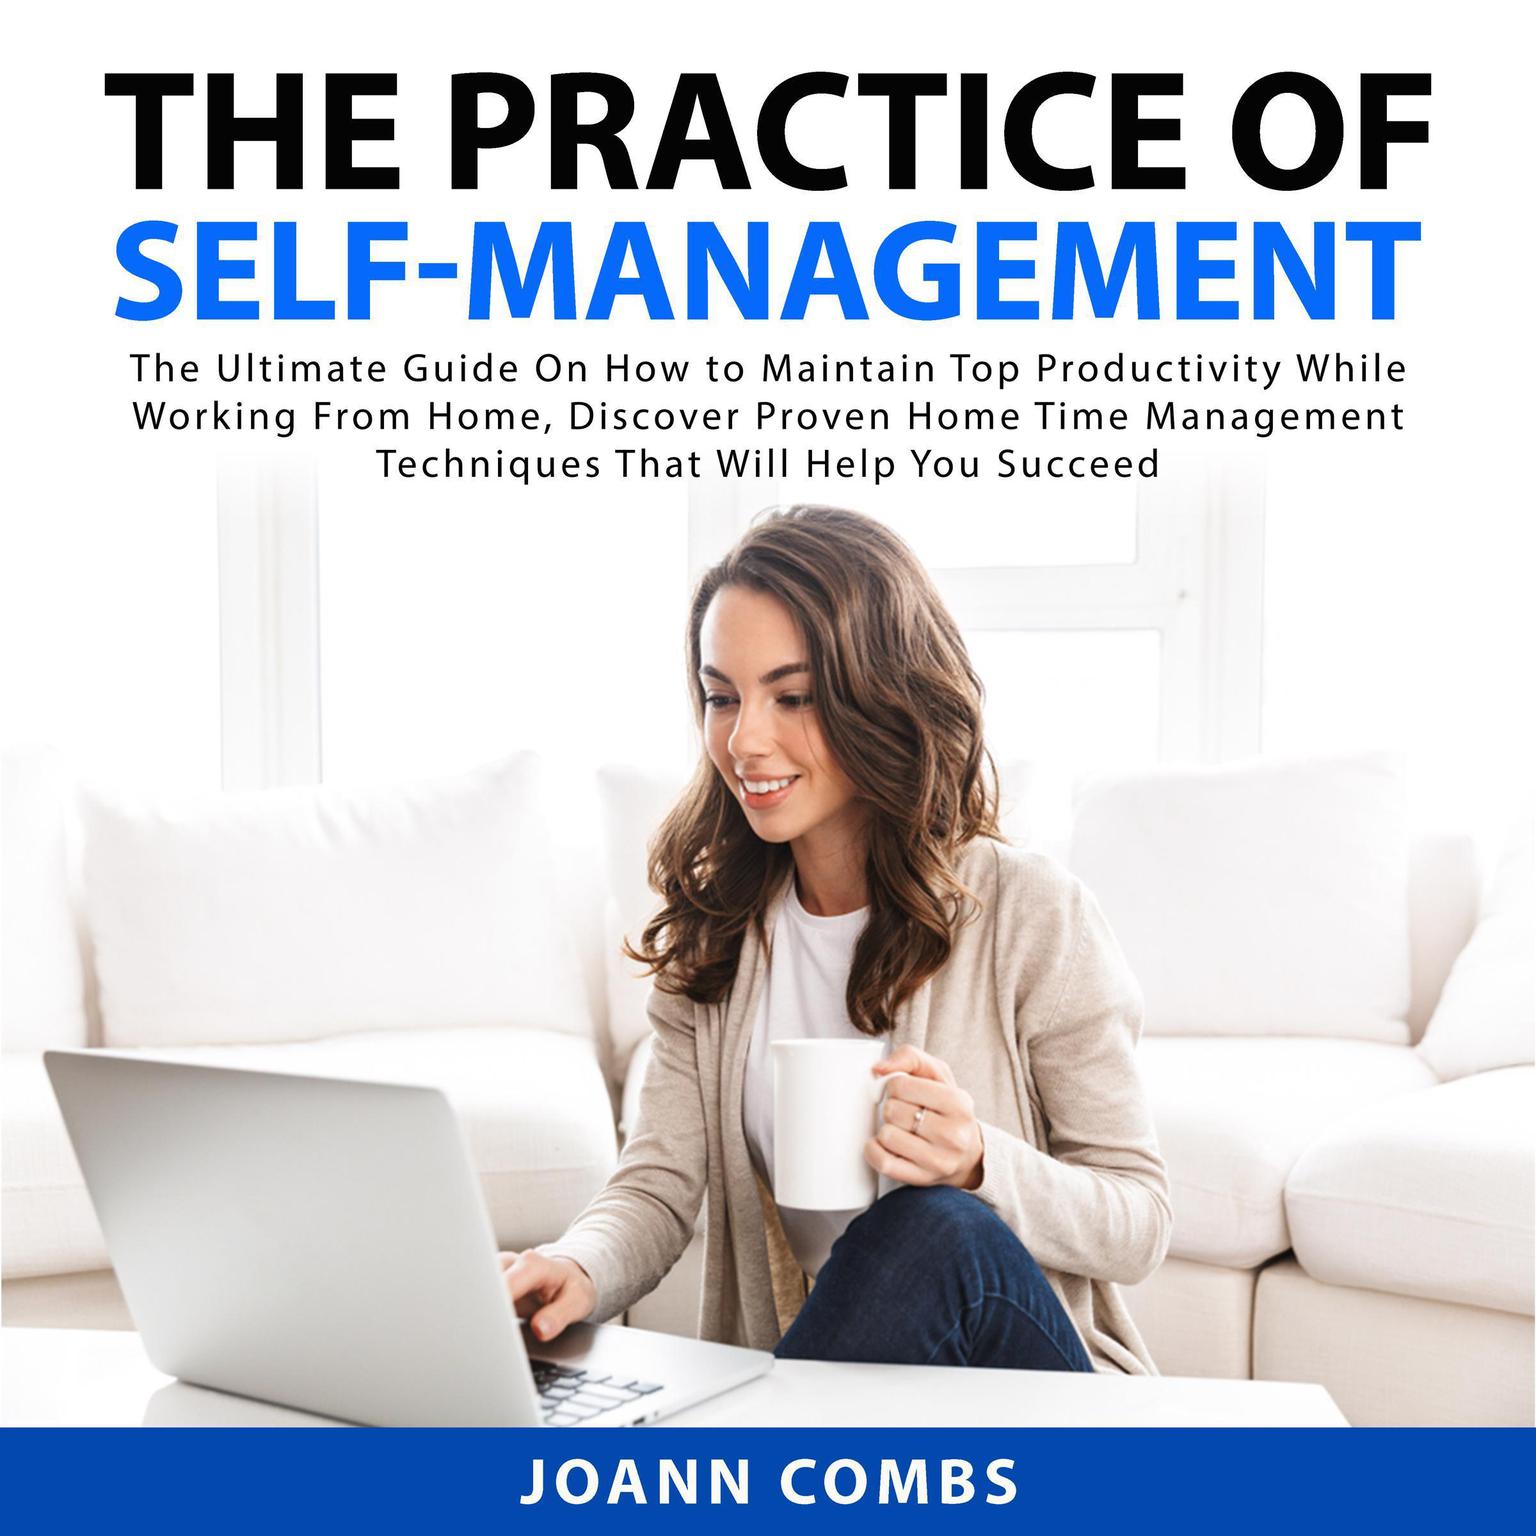 The Practice of Self-Management: The Ultimate Guide On How to Maintain Top Productivity While Working From Home, Discover Proven Home Time Management Techniques That Will Help You Succeed: The Ultimate Guide On How to Maintain Top Productivity While Working From Home, Discover Proven Home Time Management Techniques That Will Help You Succeed  Audiobook, by Joann Combs